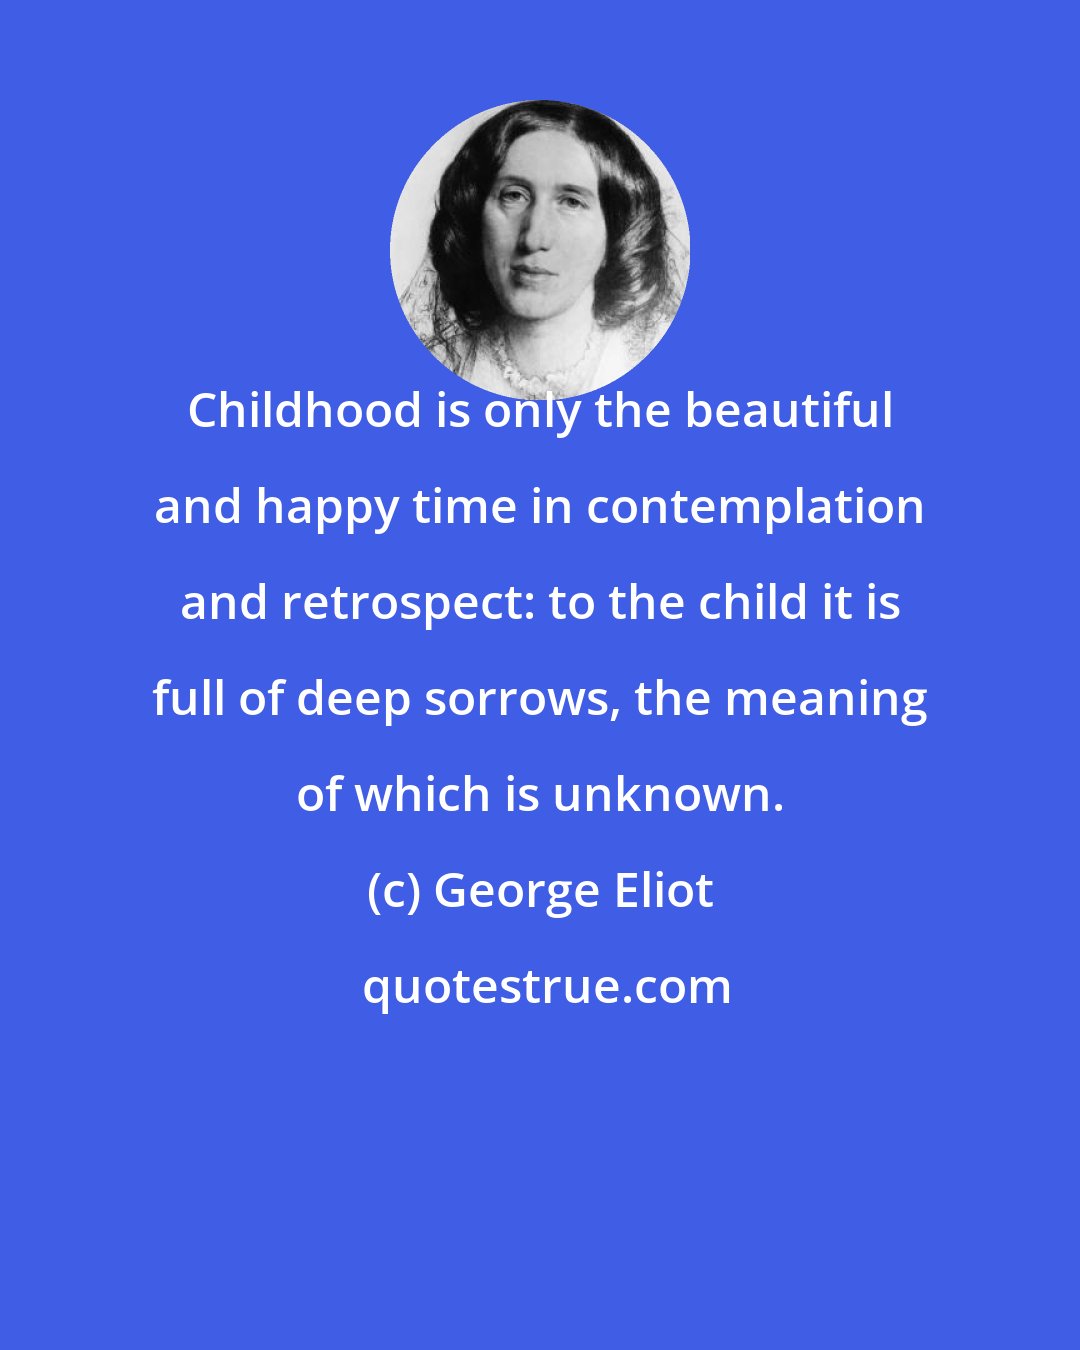 George Eliot: Childhood is only the beautiful and happy time in contemplation and retrospect: to the child it is full of deep sorrows, the meaning of which is unknown.